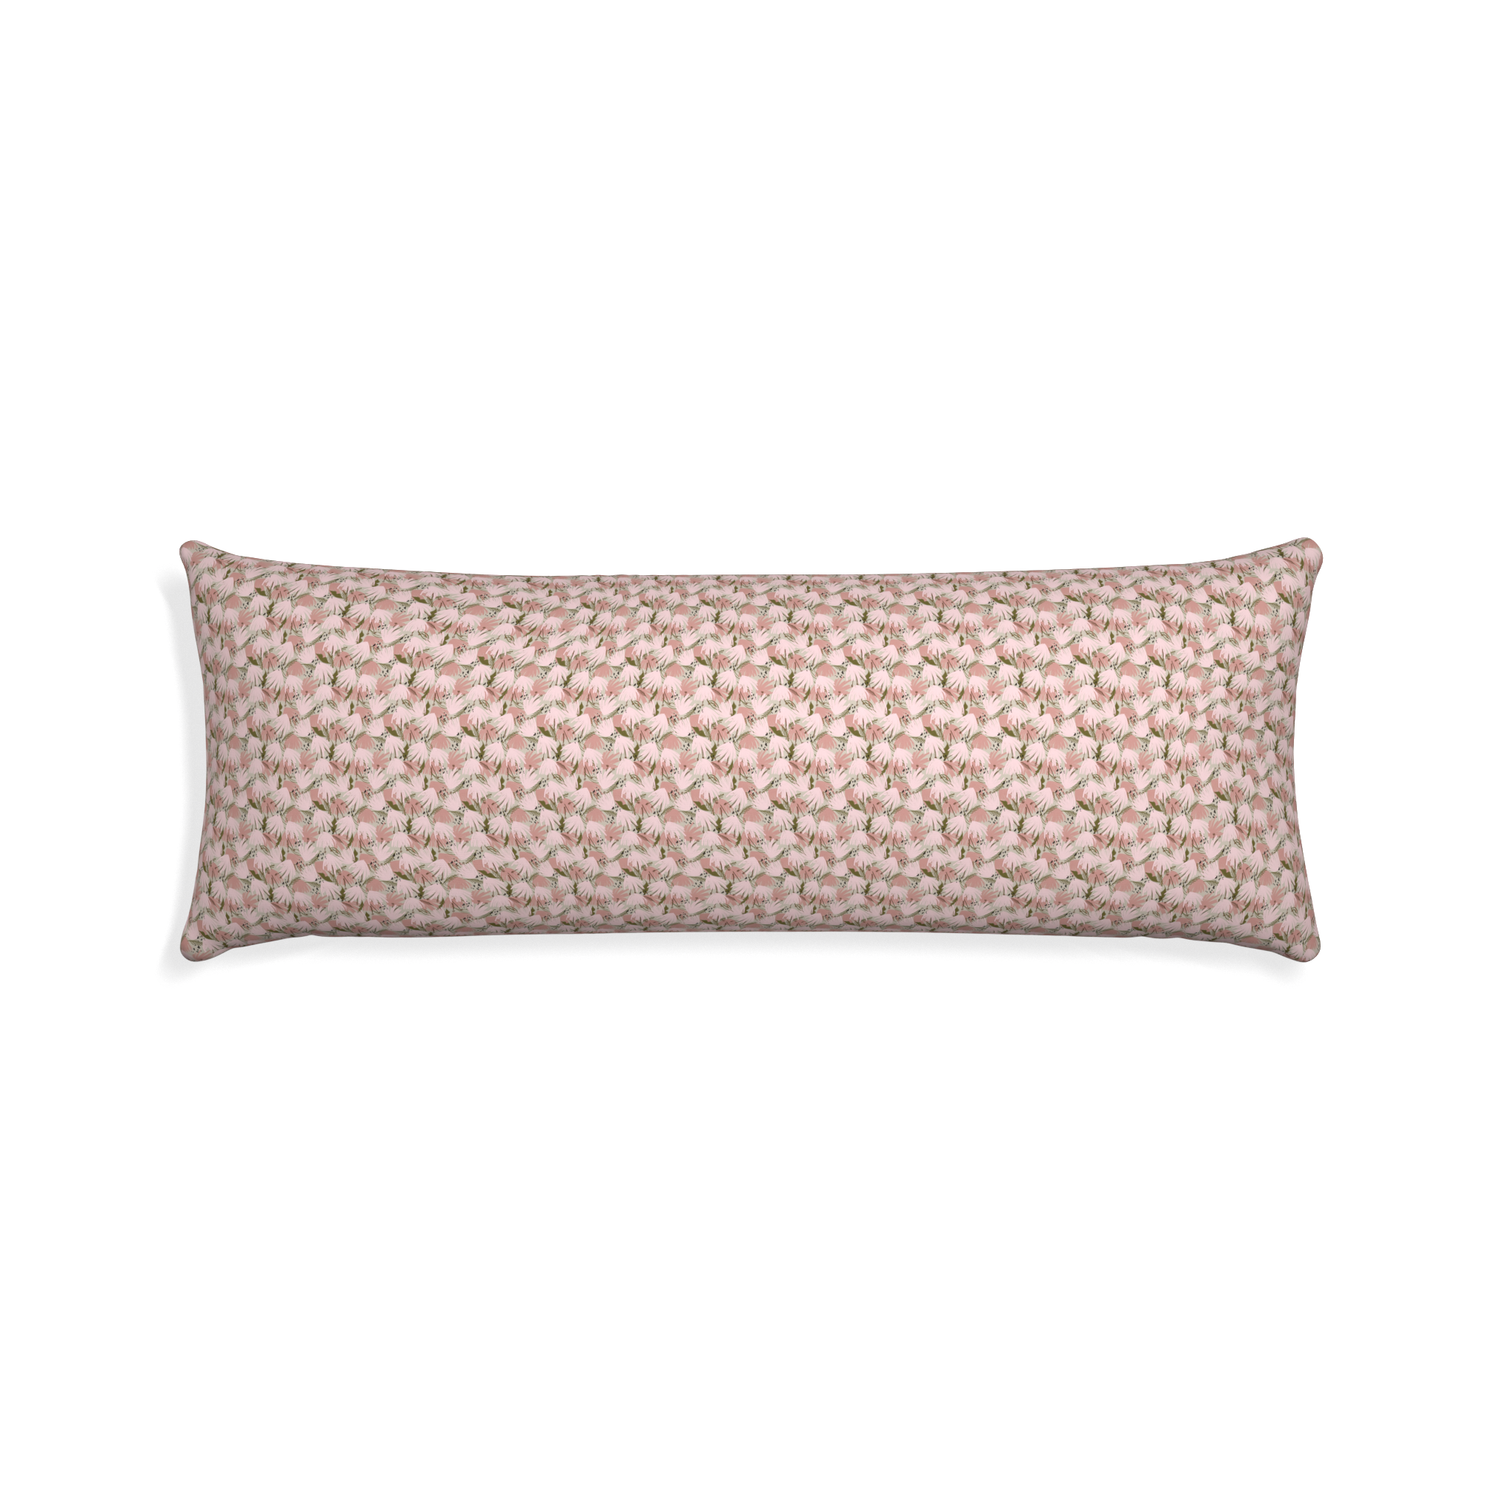 Xl-lumbar eden pink custom pink floralpillow with none on white background